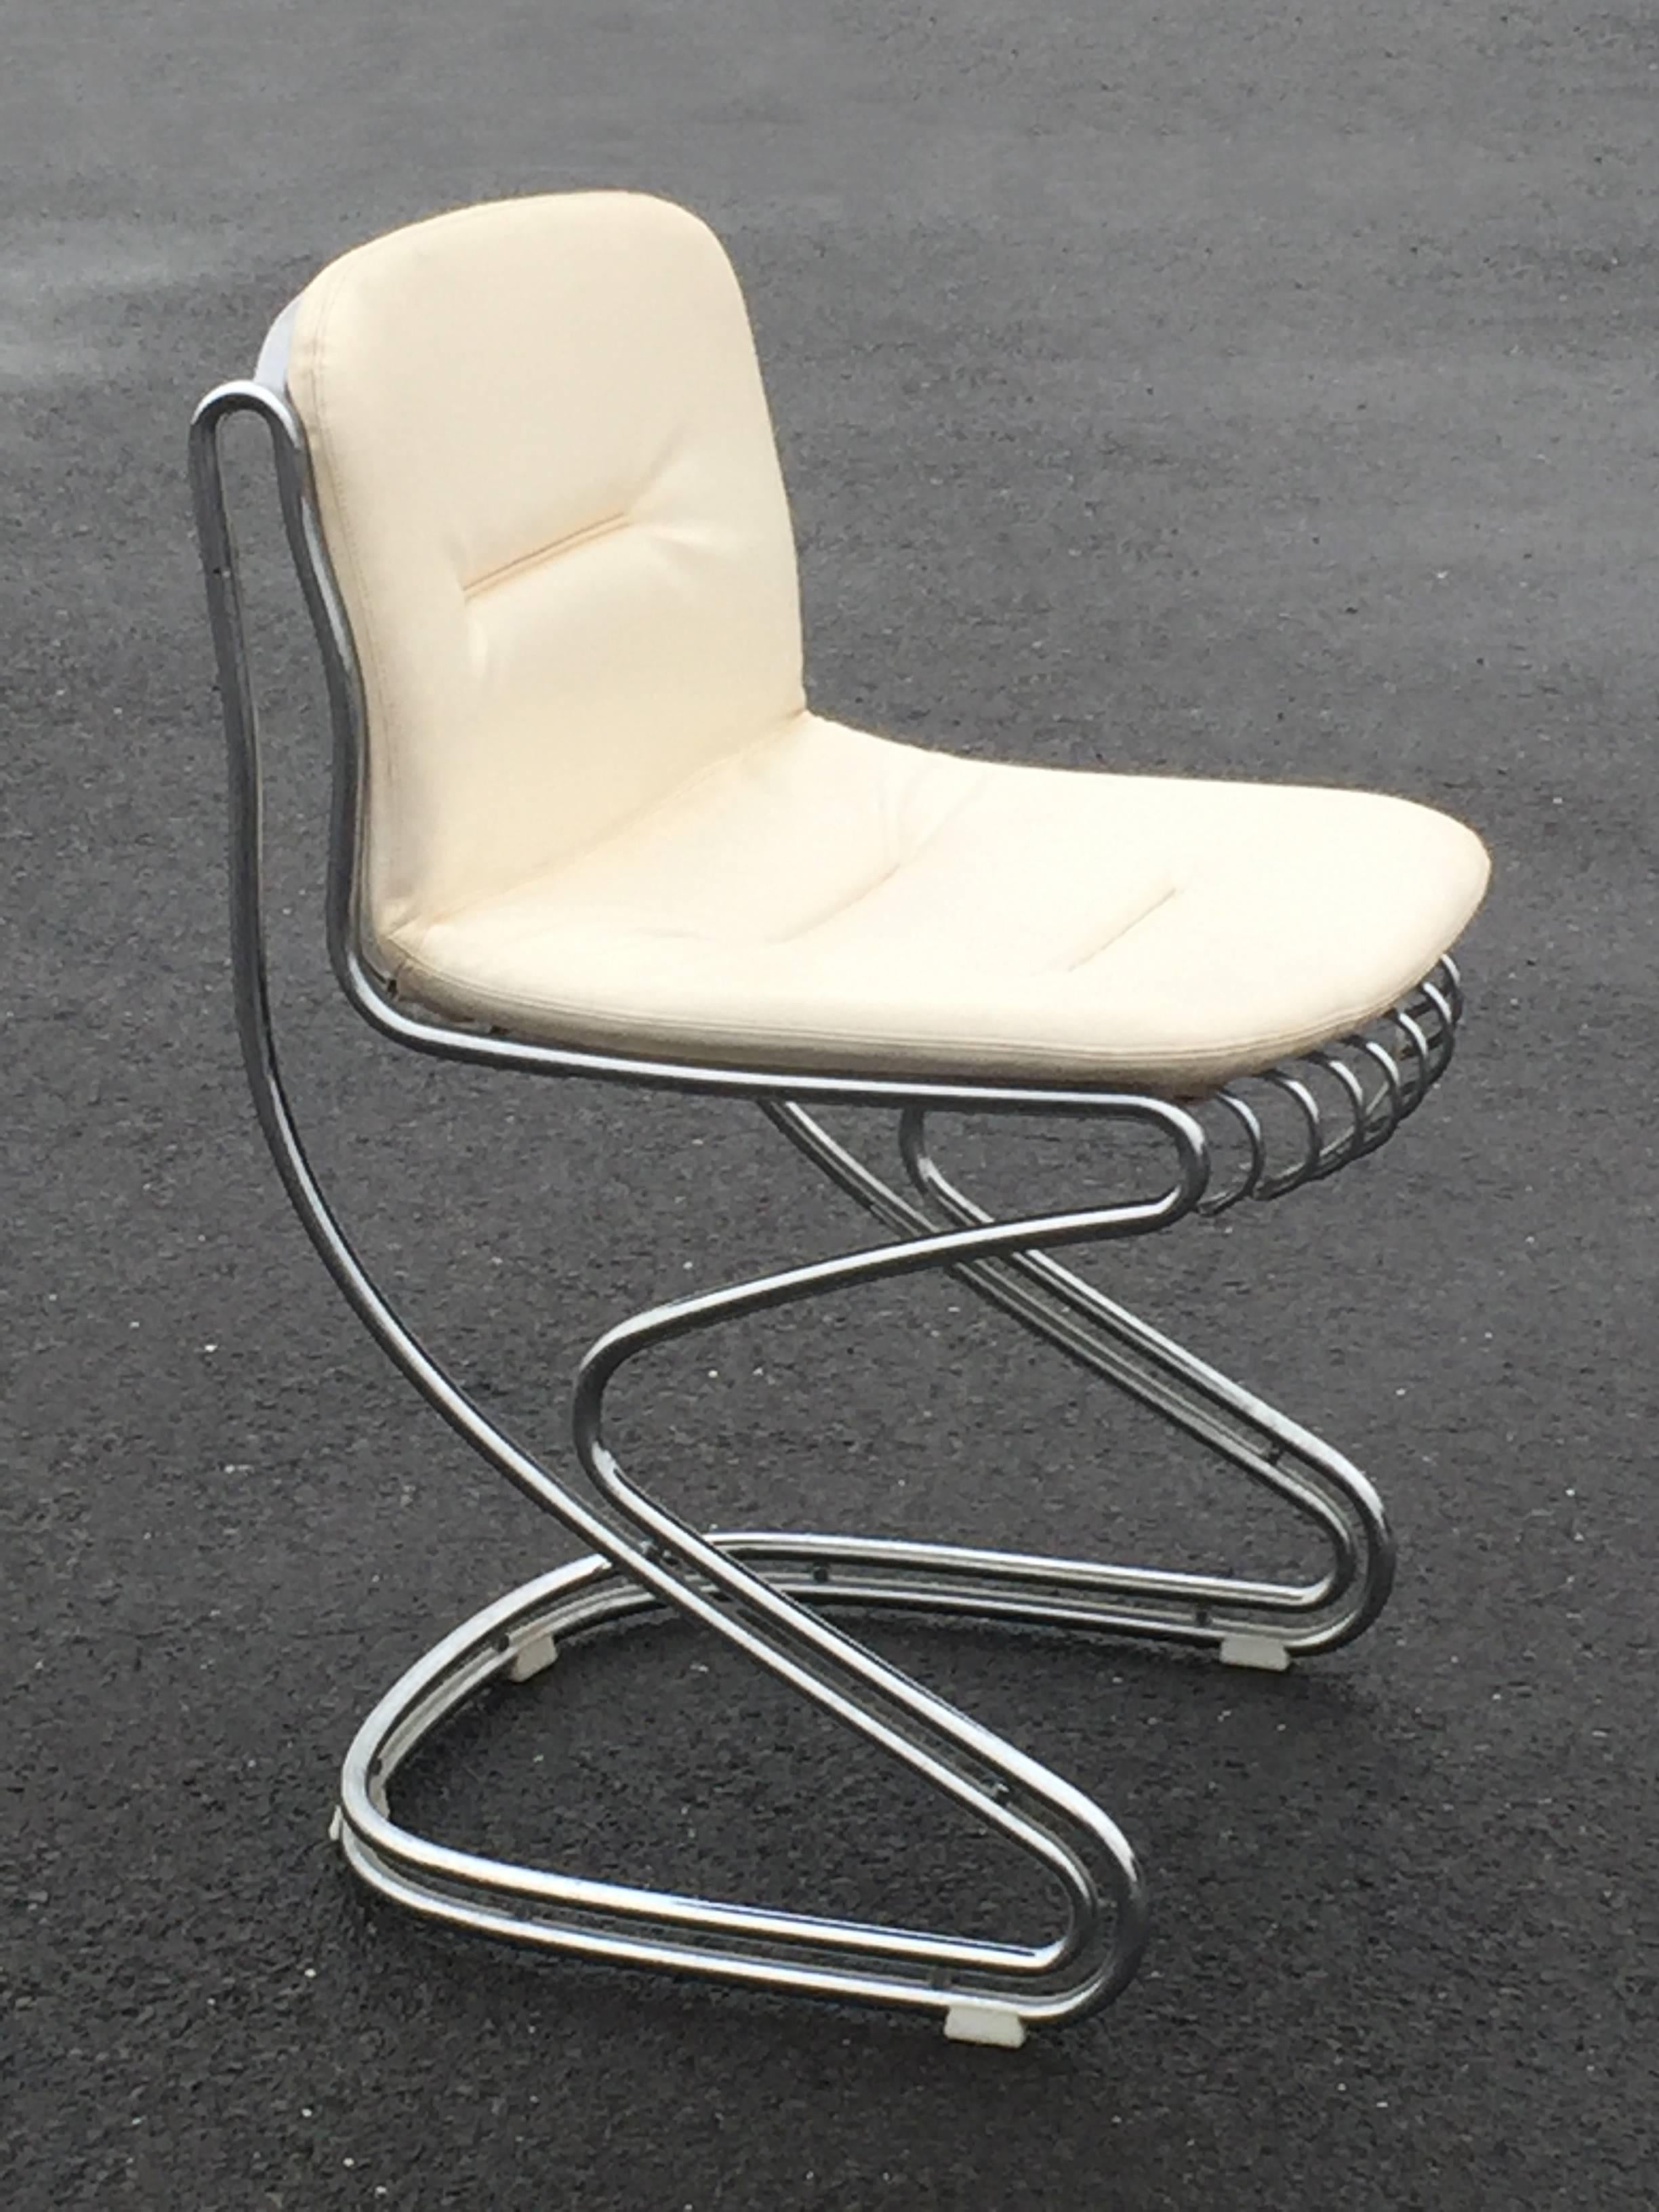 Four chrome and white faux leather side chairs by Italian design legend Gastone Rinaldi for Rima. Original white leather like upholstery is in very good condition and the sculptural sleek tubular chrome bases are stunning.
Seat height 19.5